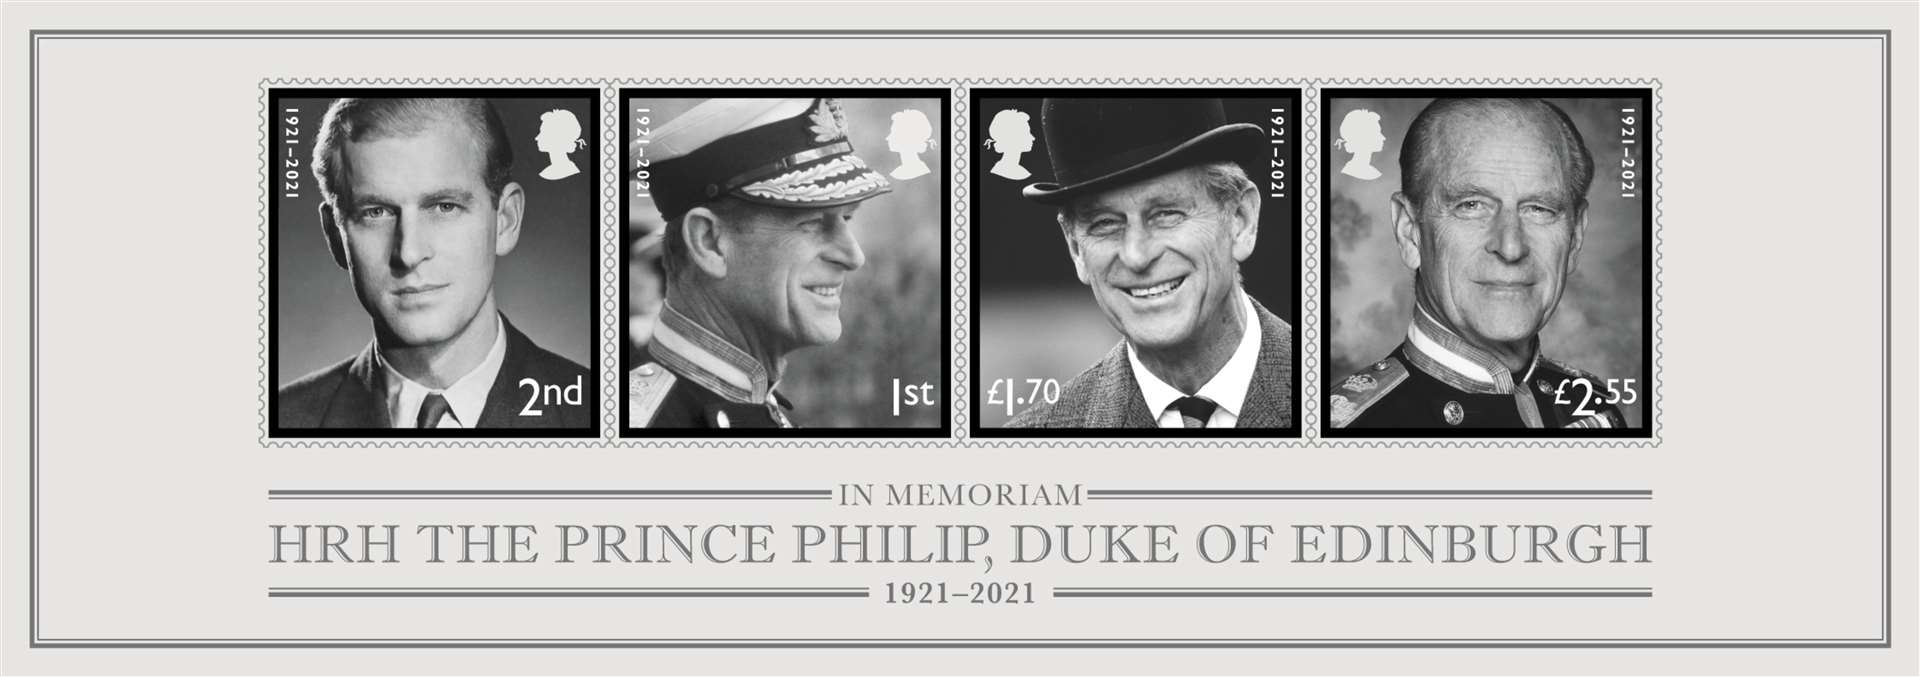 Royal Mail has released a new collection of stamps to mark the life of The Duke of Edinburgh